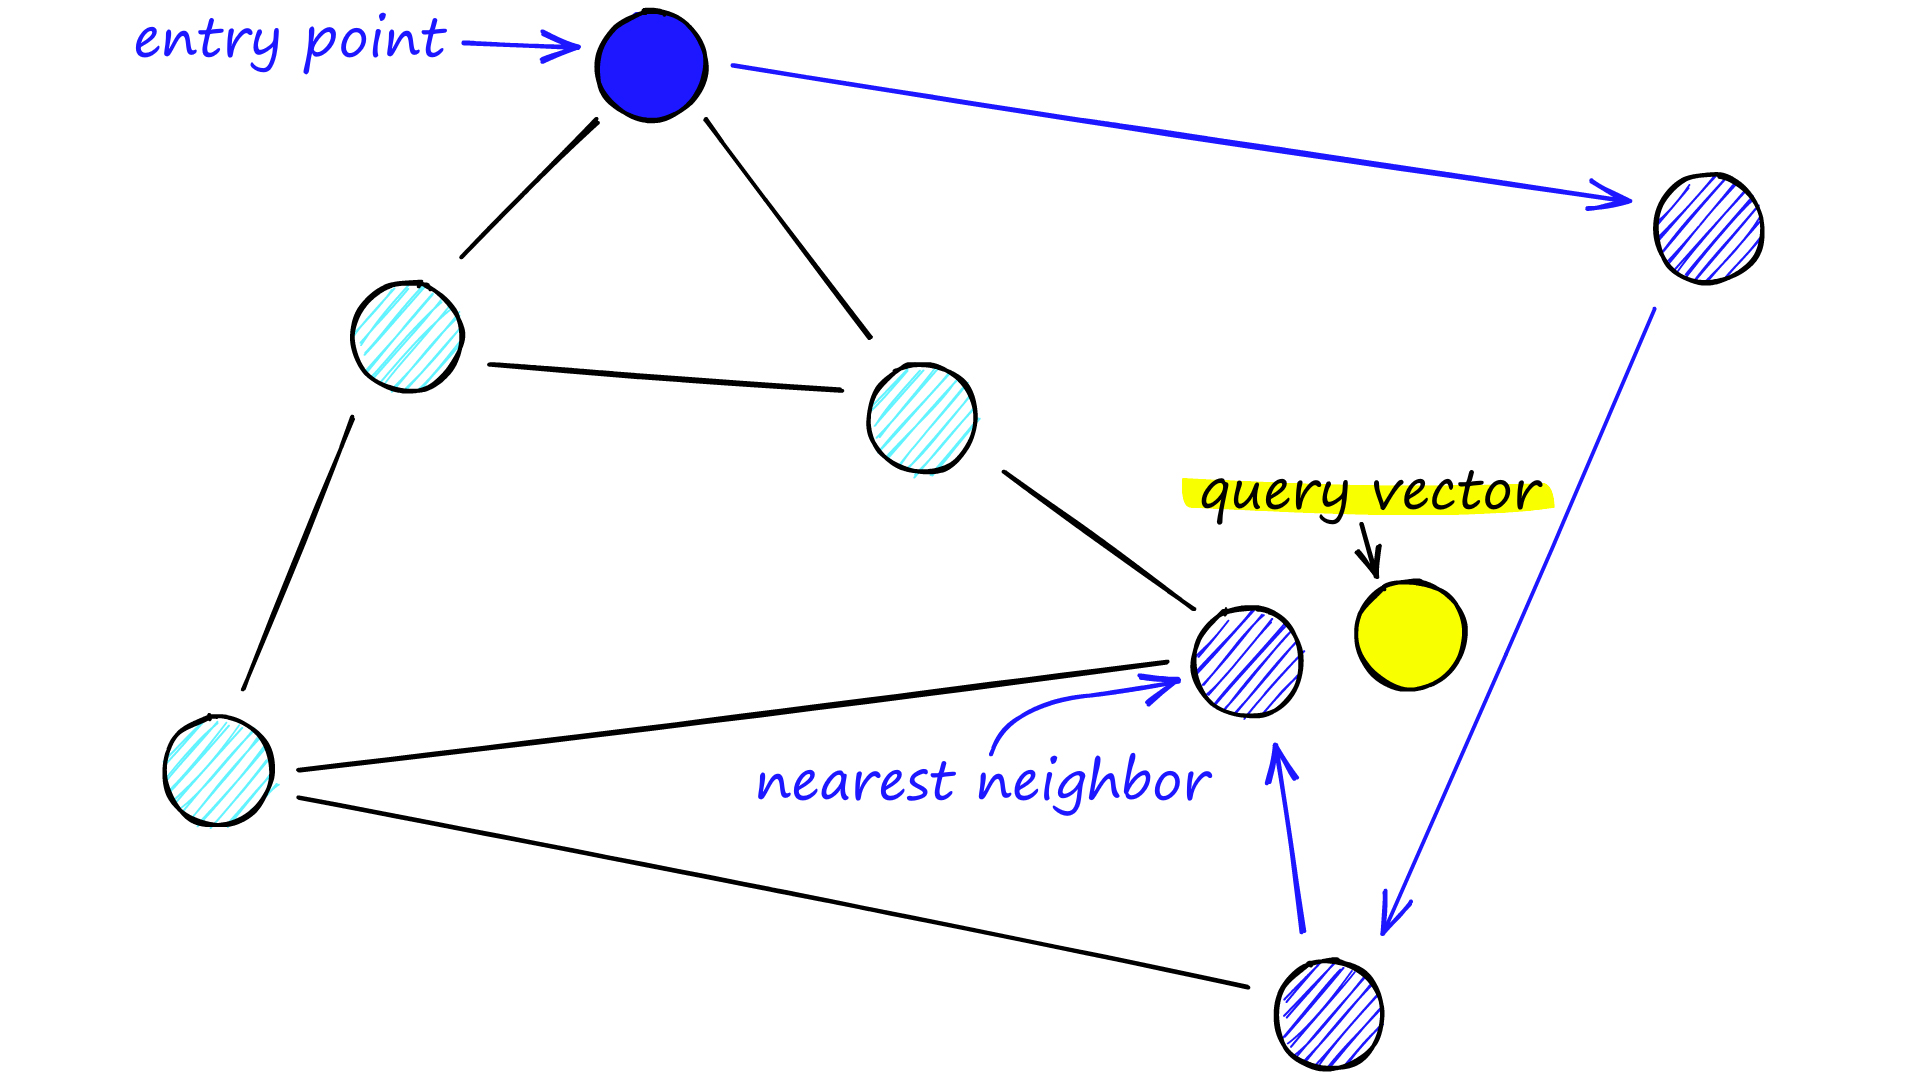 The search process through a NSW graph. Starting at a pre-defined entry point, the algorithm greedily traverses to connected vertices that are nearer to the query vector.